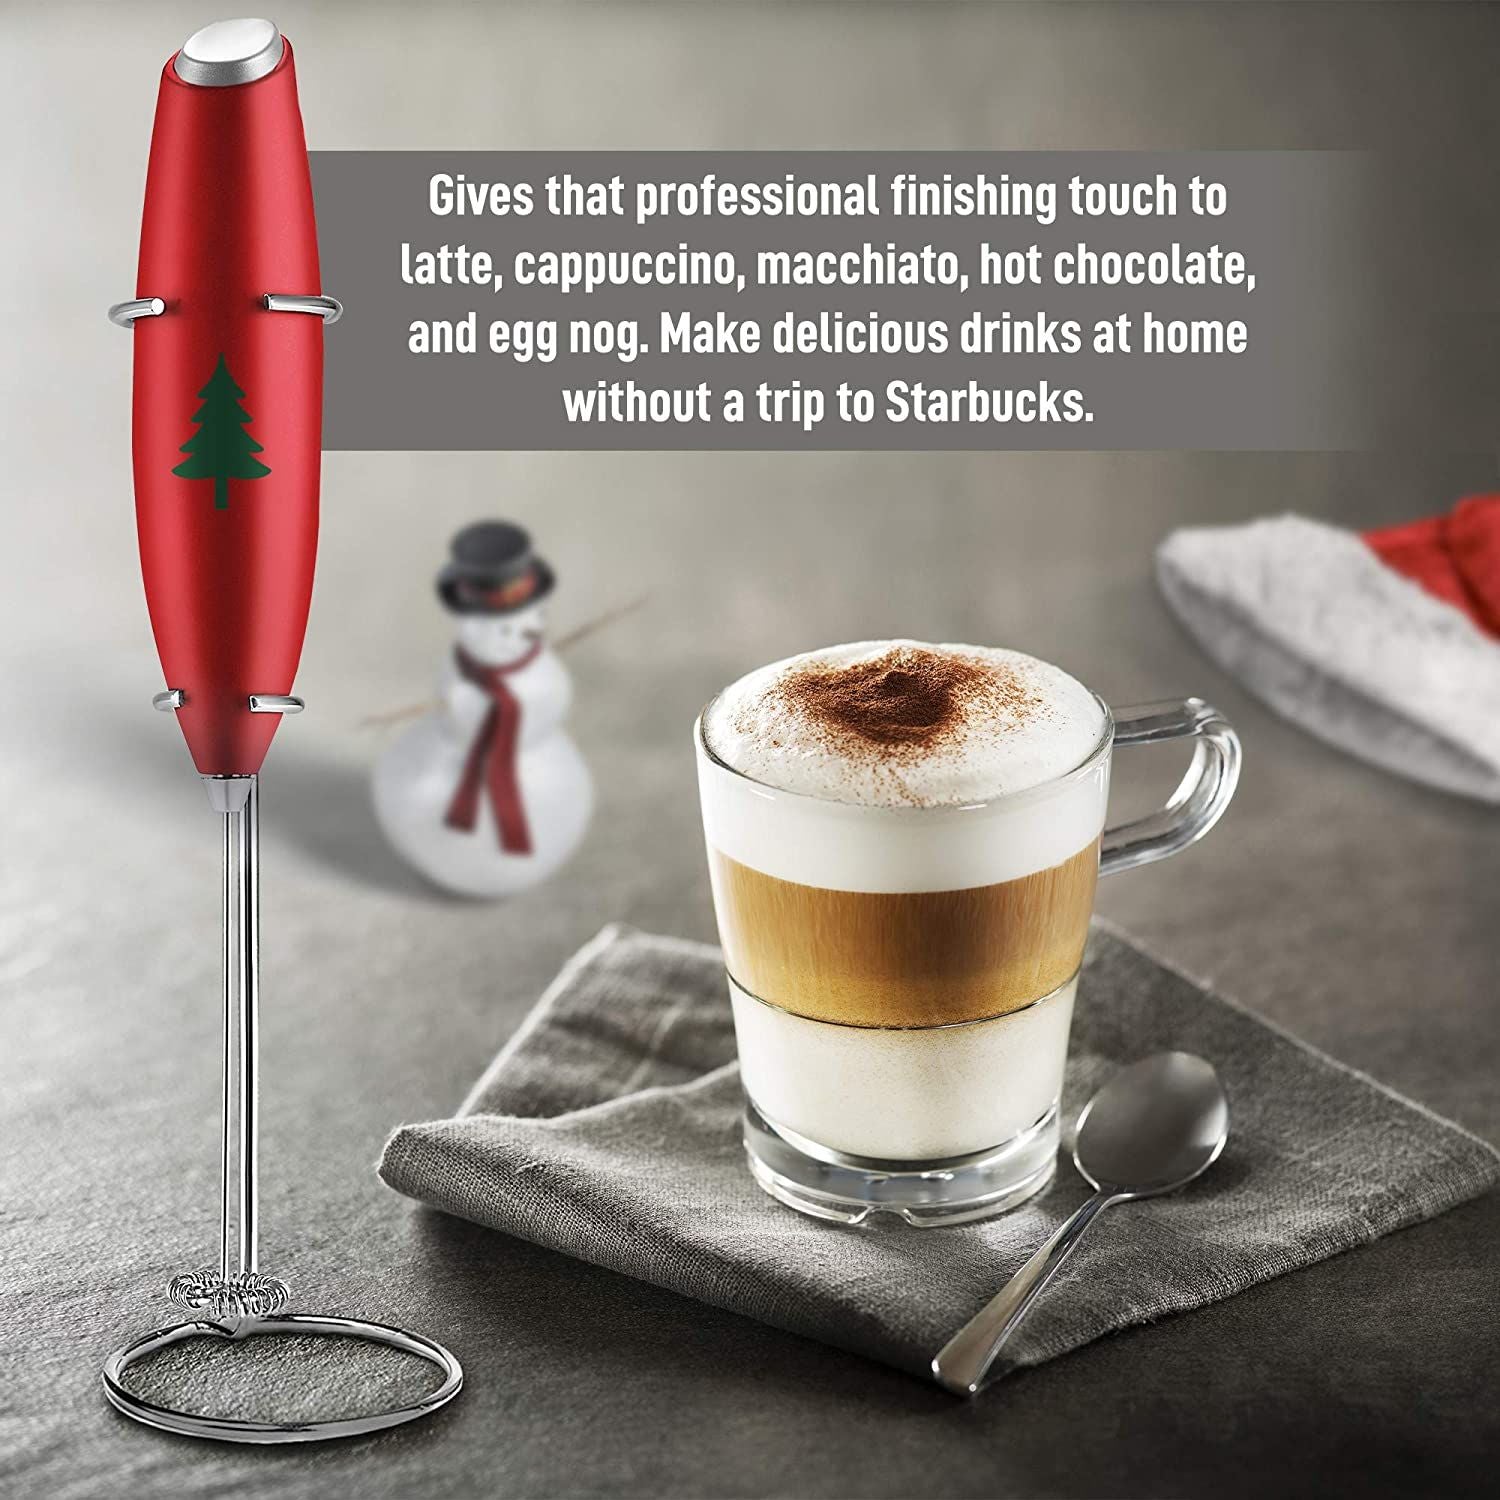 Electric Milk Frother HandHeld Frother with Stand Coffee Mixer